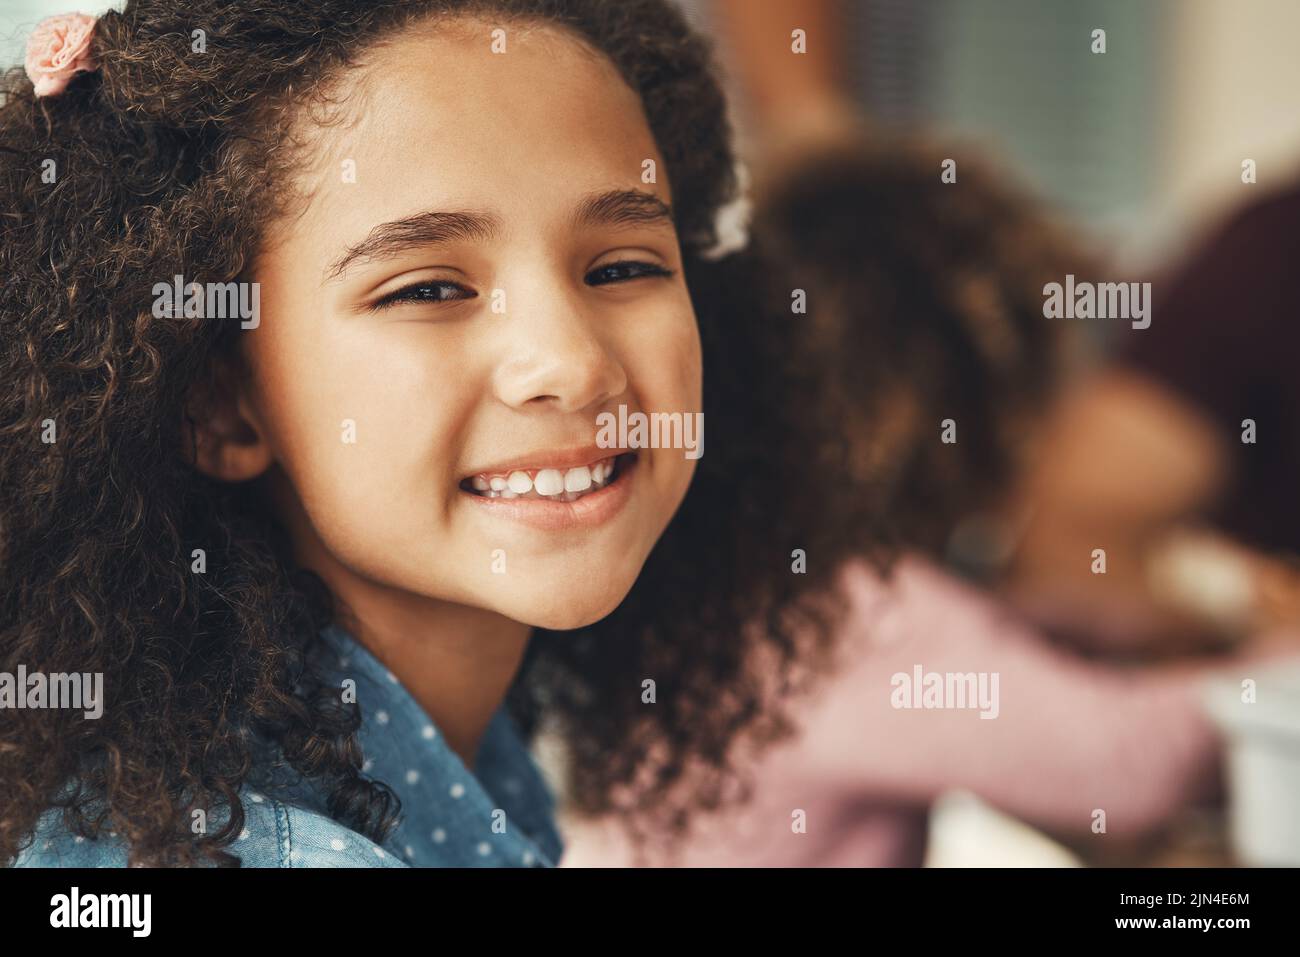 Im always happy when we all get together. Portrait of an adorable little girl enjoying herself during a family gathering. Stock Photo